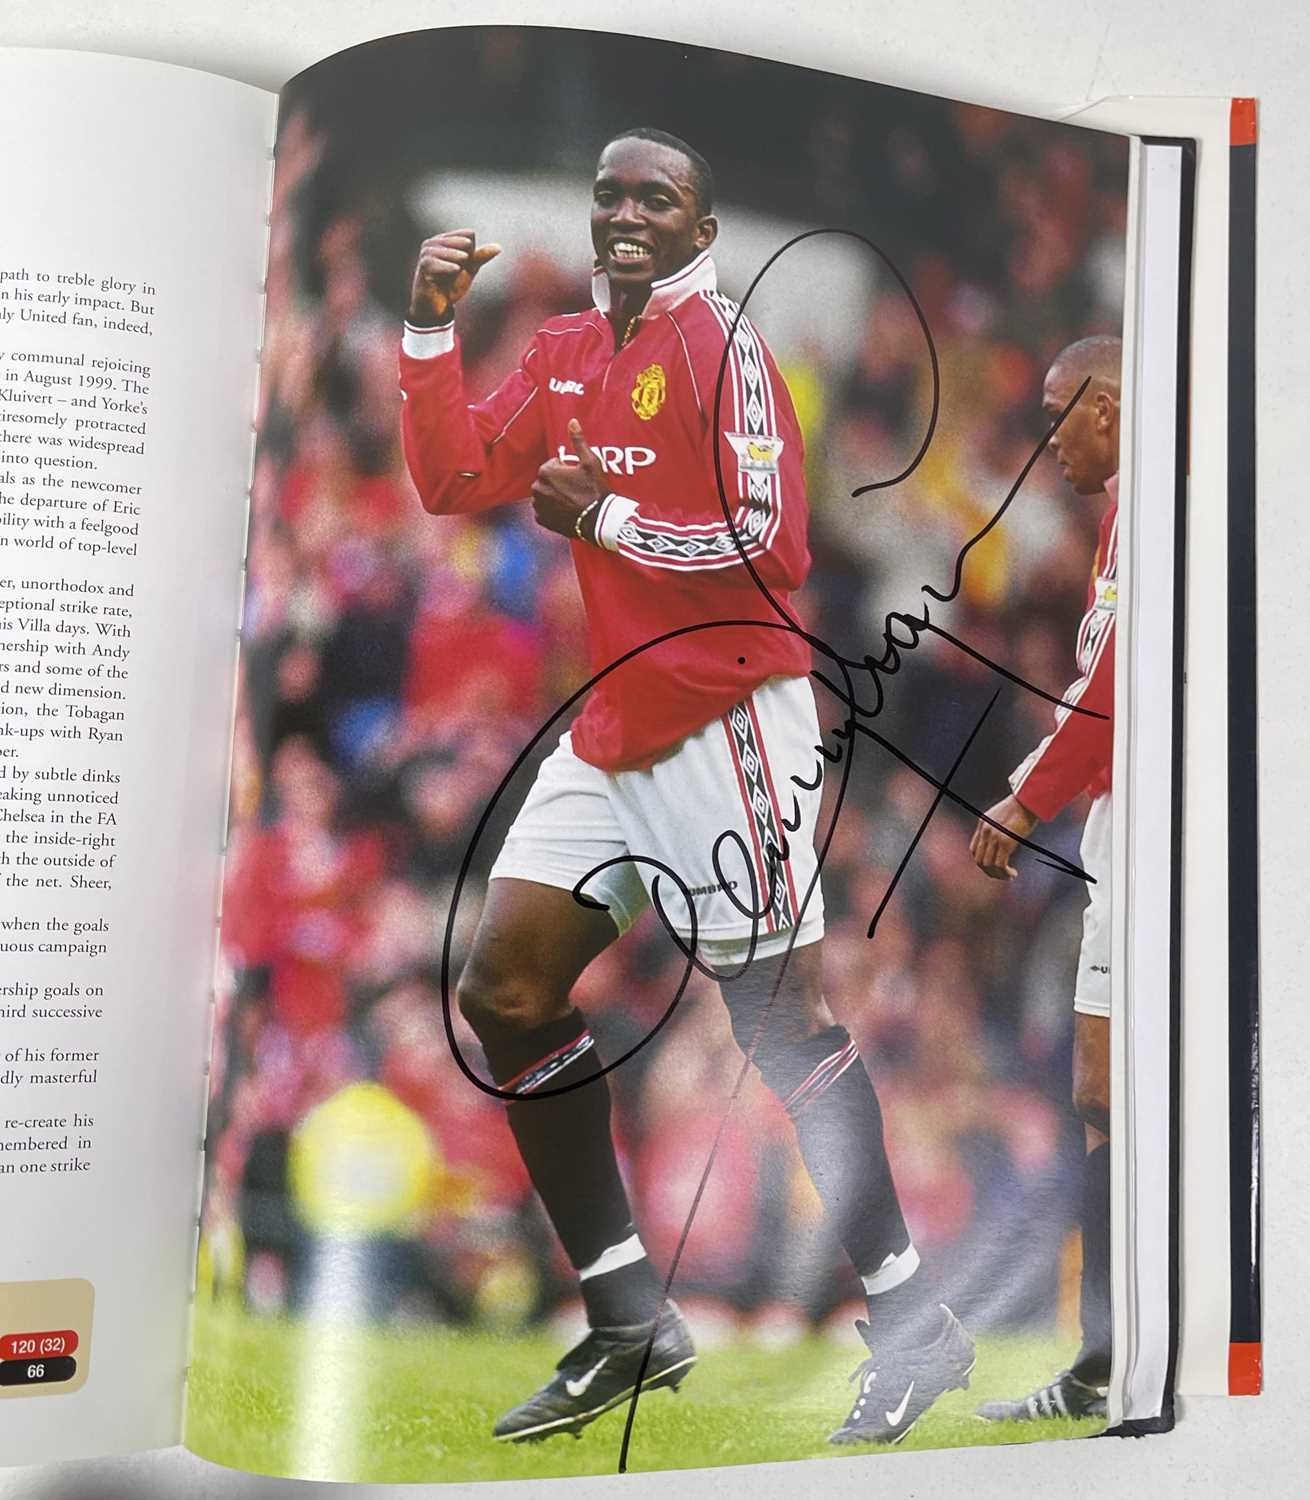 FOOTBALL MEMORABILIA - MANCHESTER UNITED MULTI SIGNED 'PLAYER BY PLAYER' BOOK. - Image 45 of 50